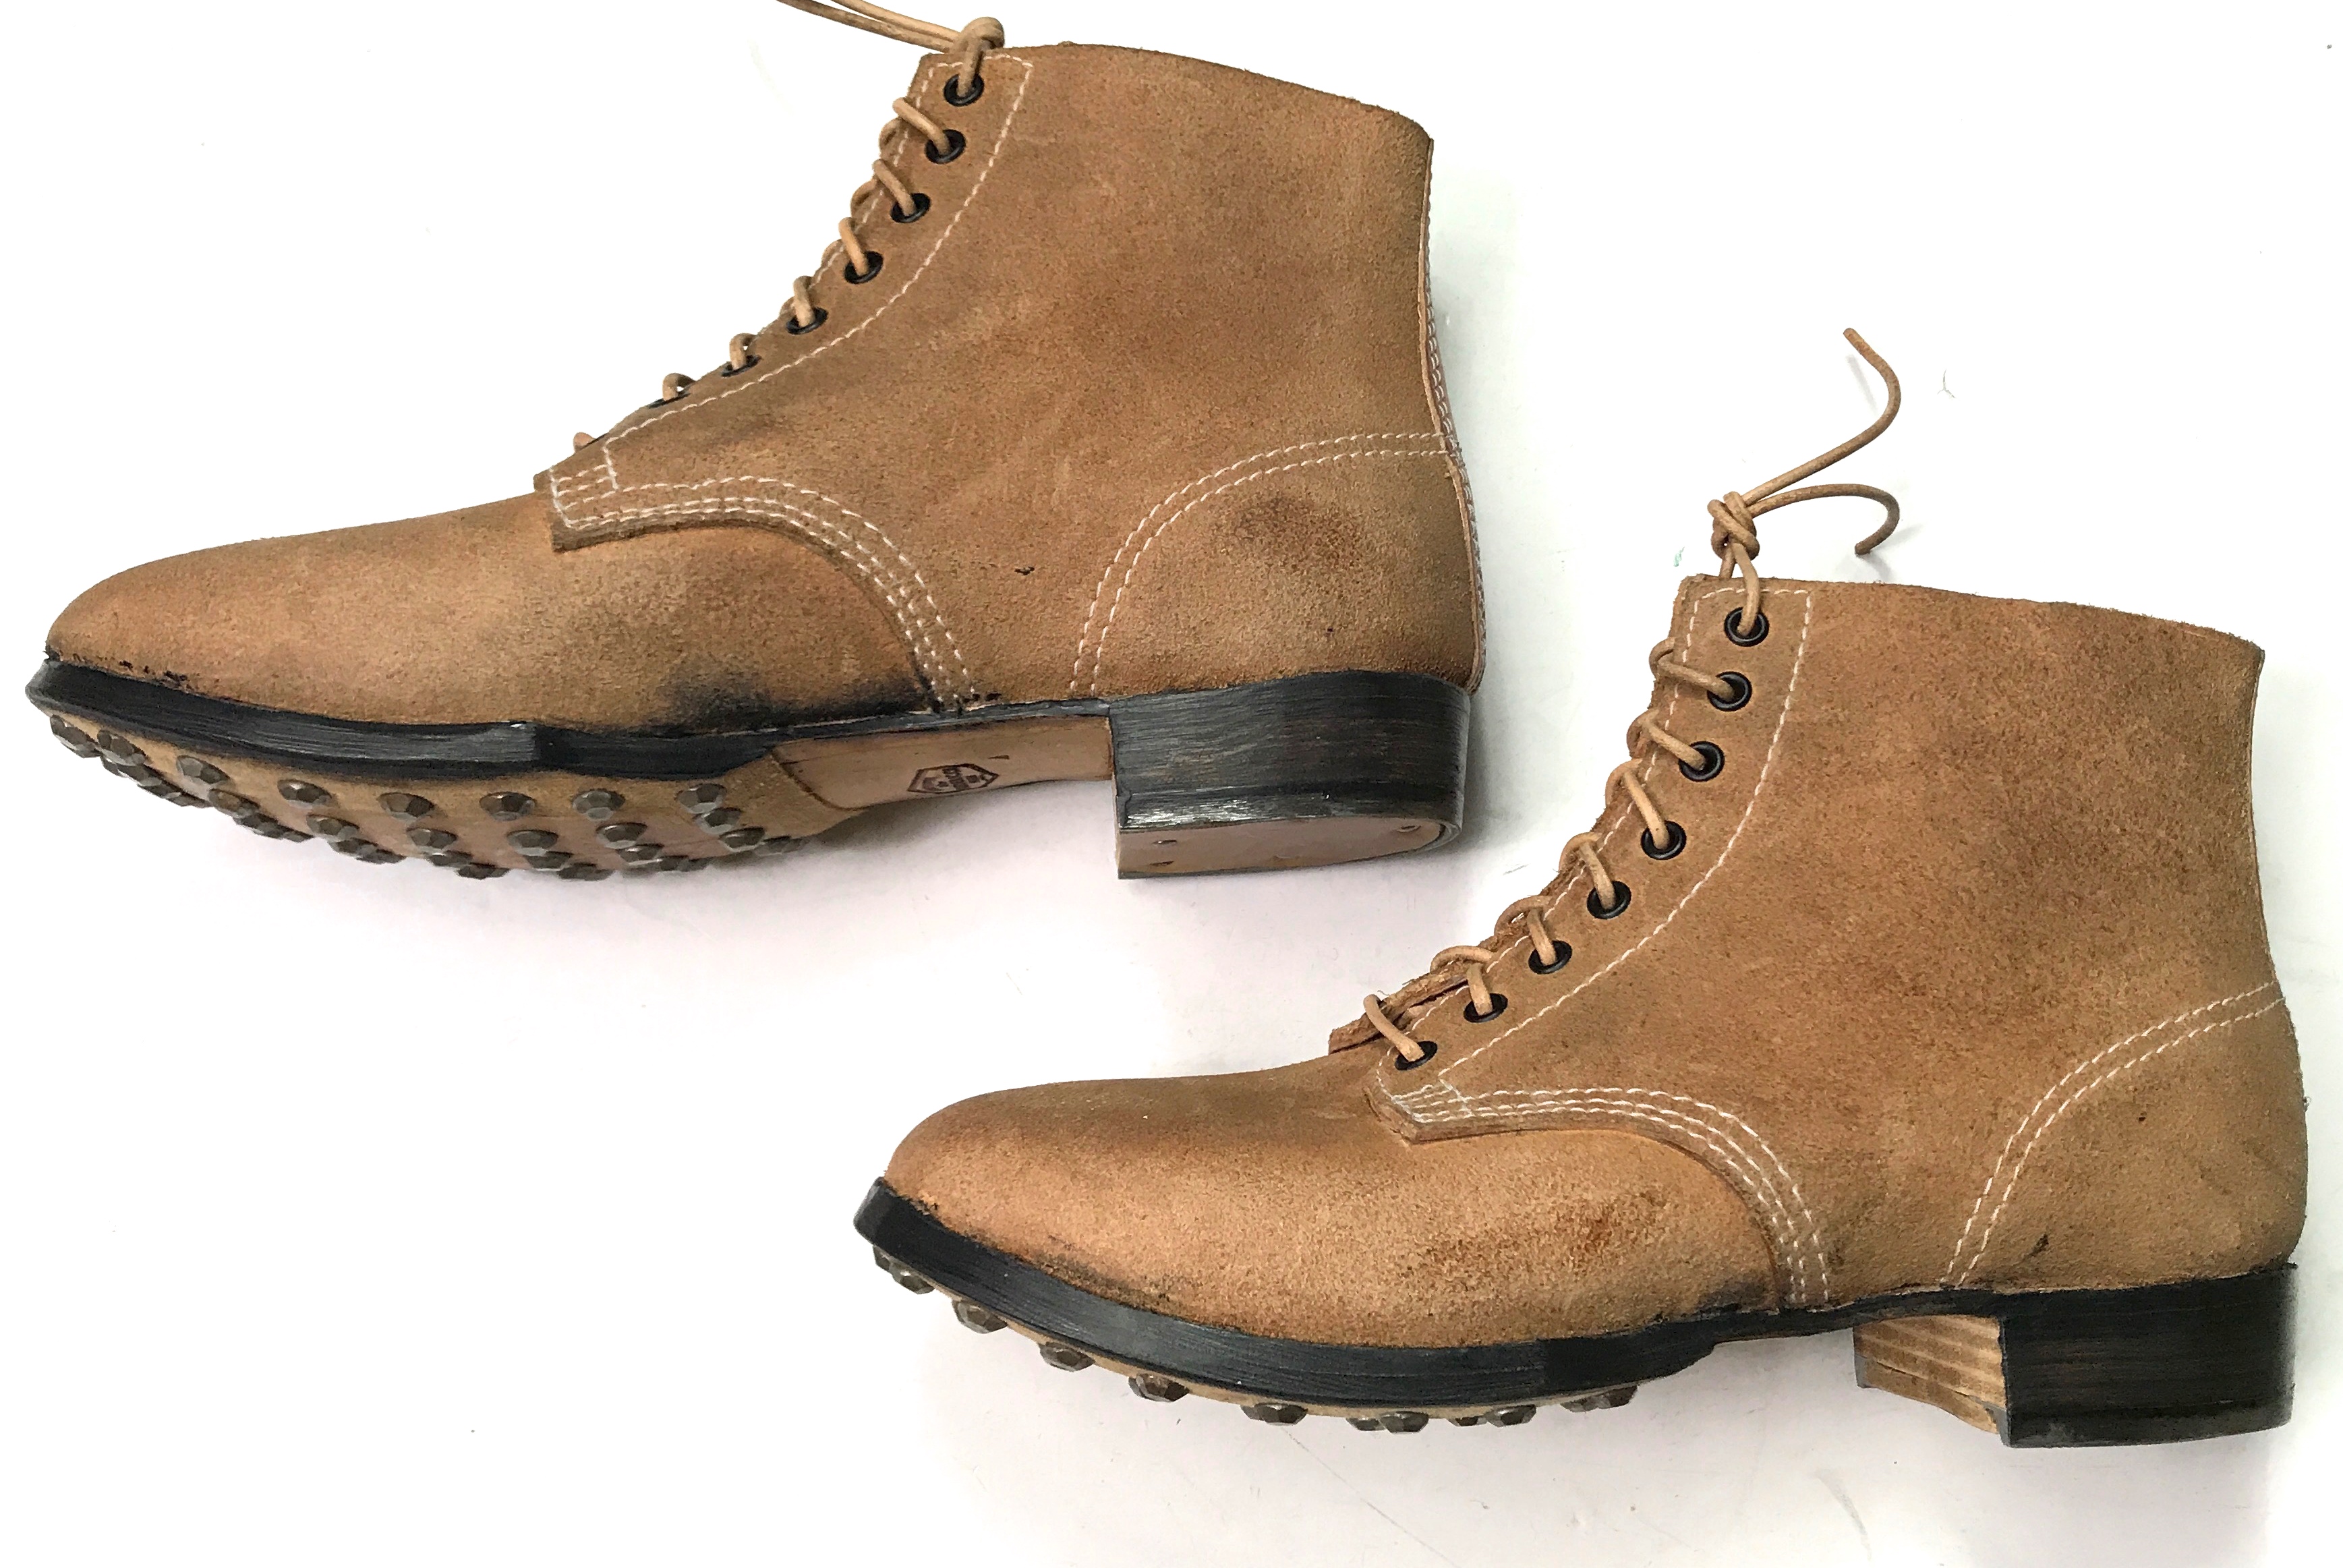 M43 “ROUGH OUTS” LOW BOOTS | Man The Line